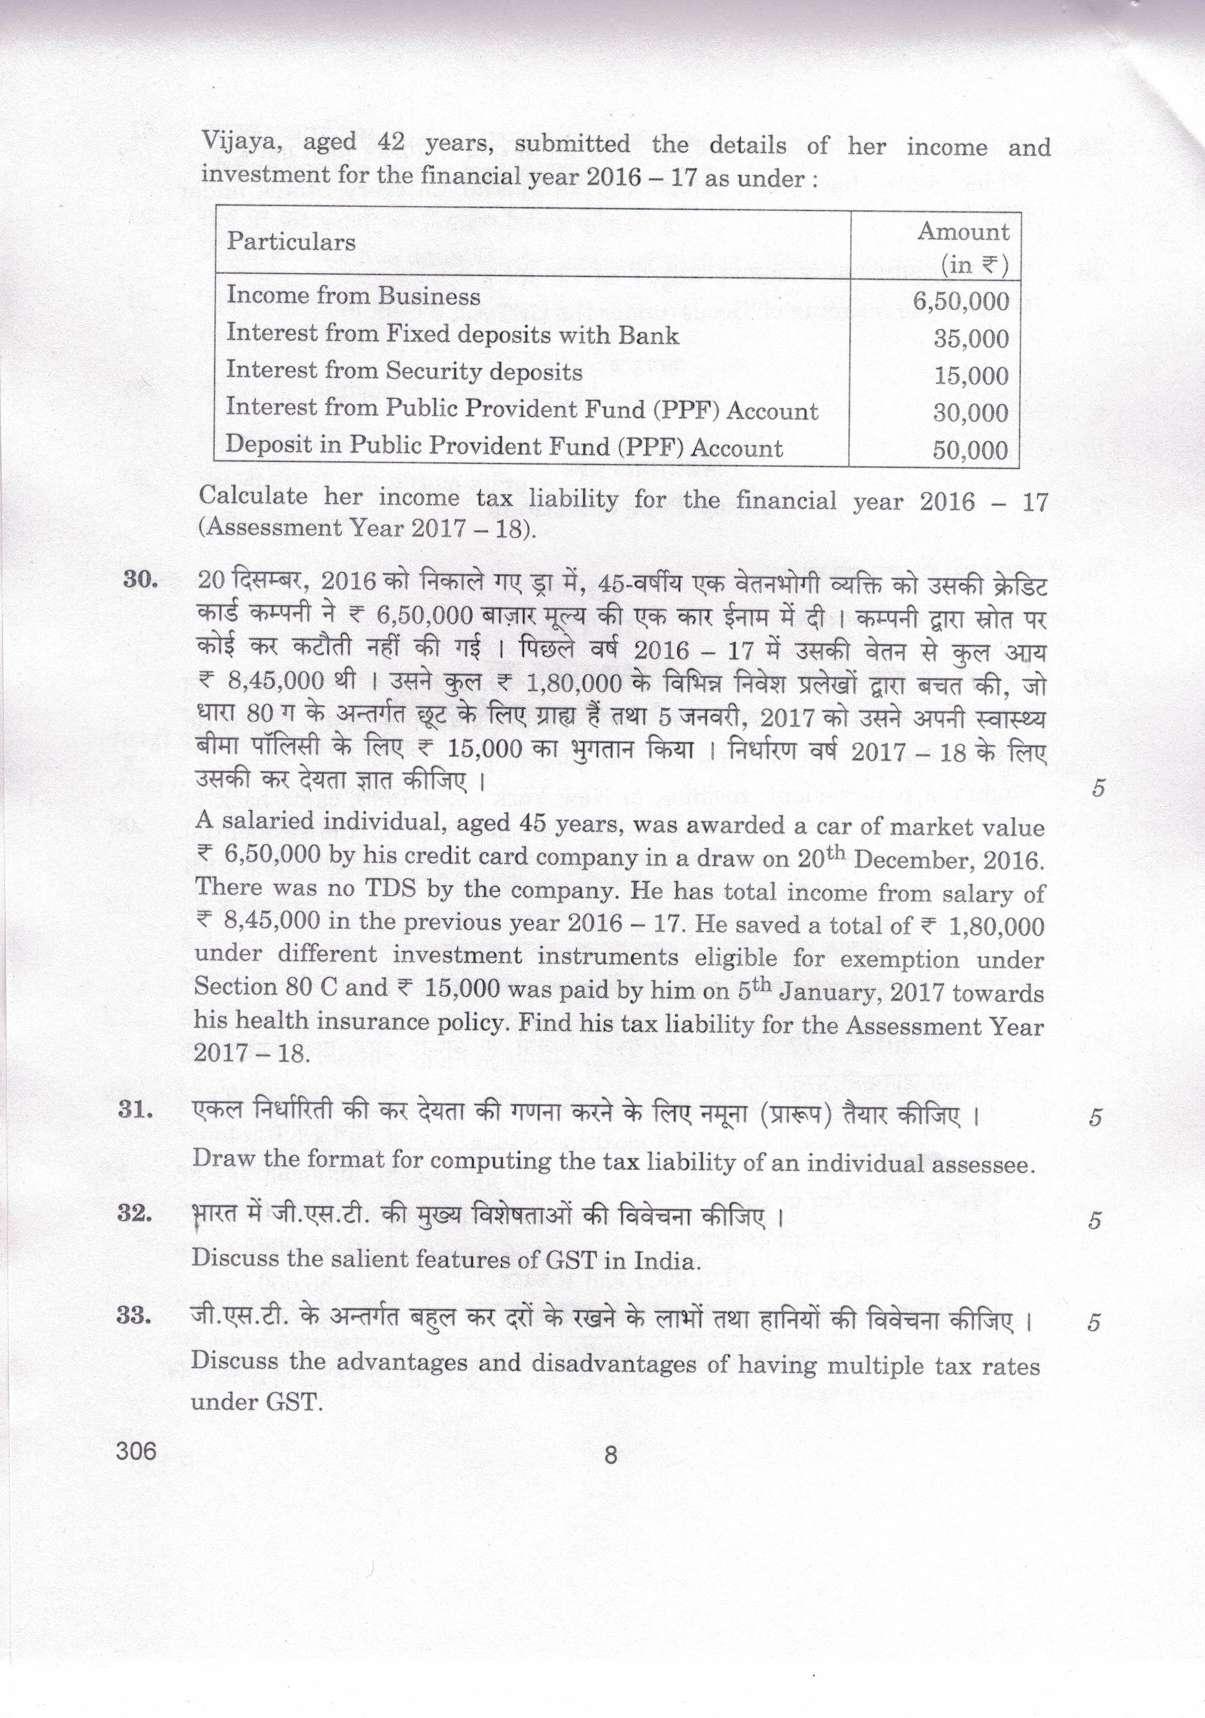 CBSE Class 12 306 Taxation_compressed 2019 Question Paper - Page 8